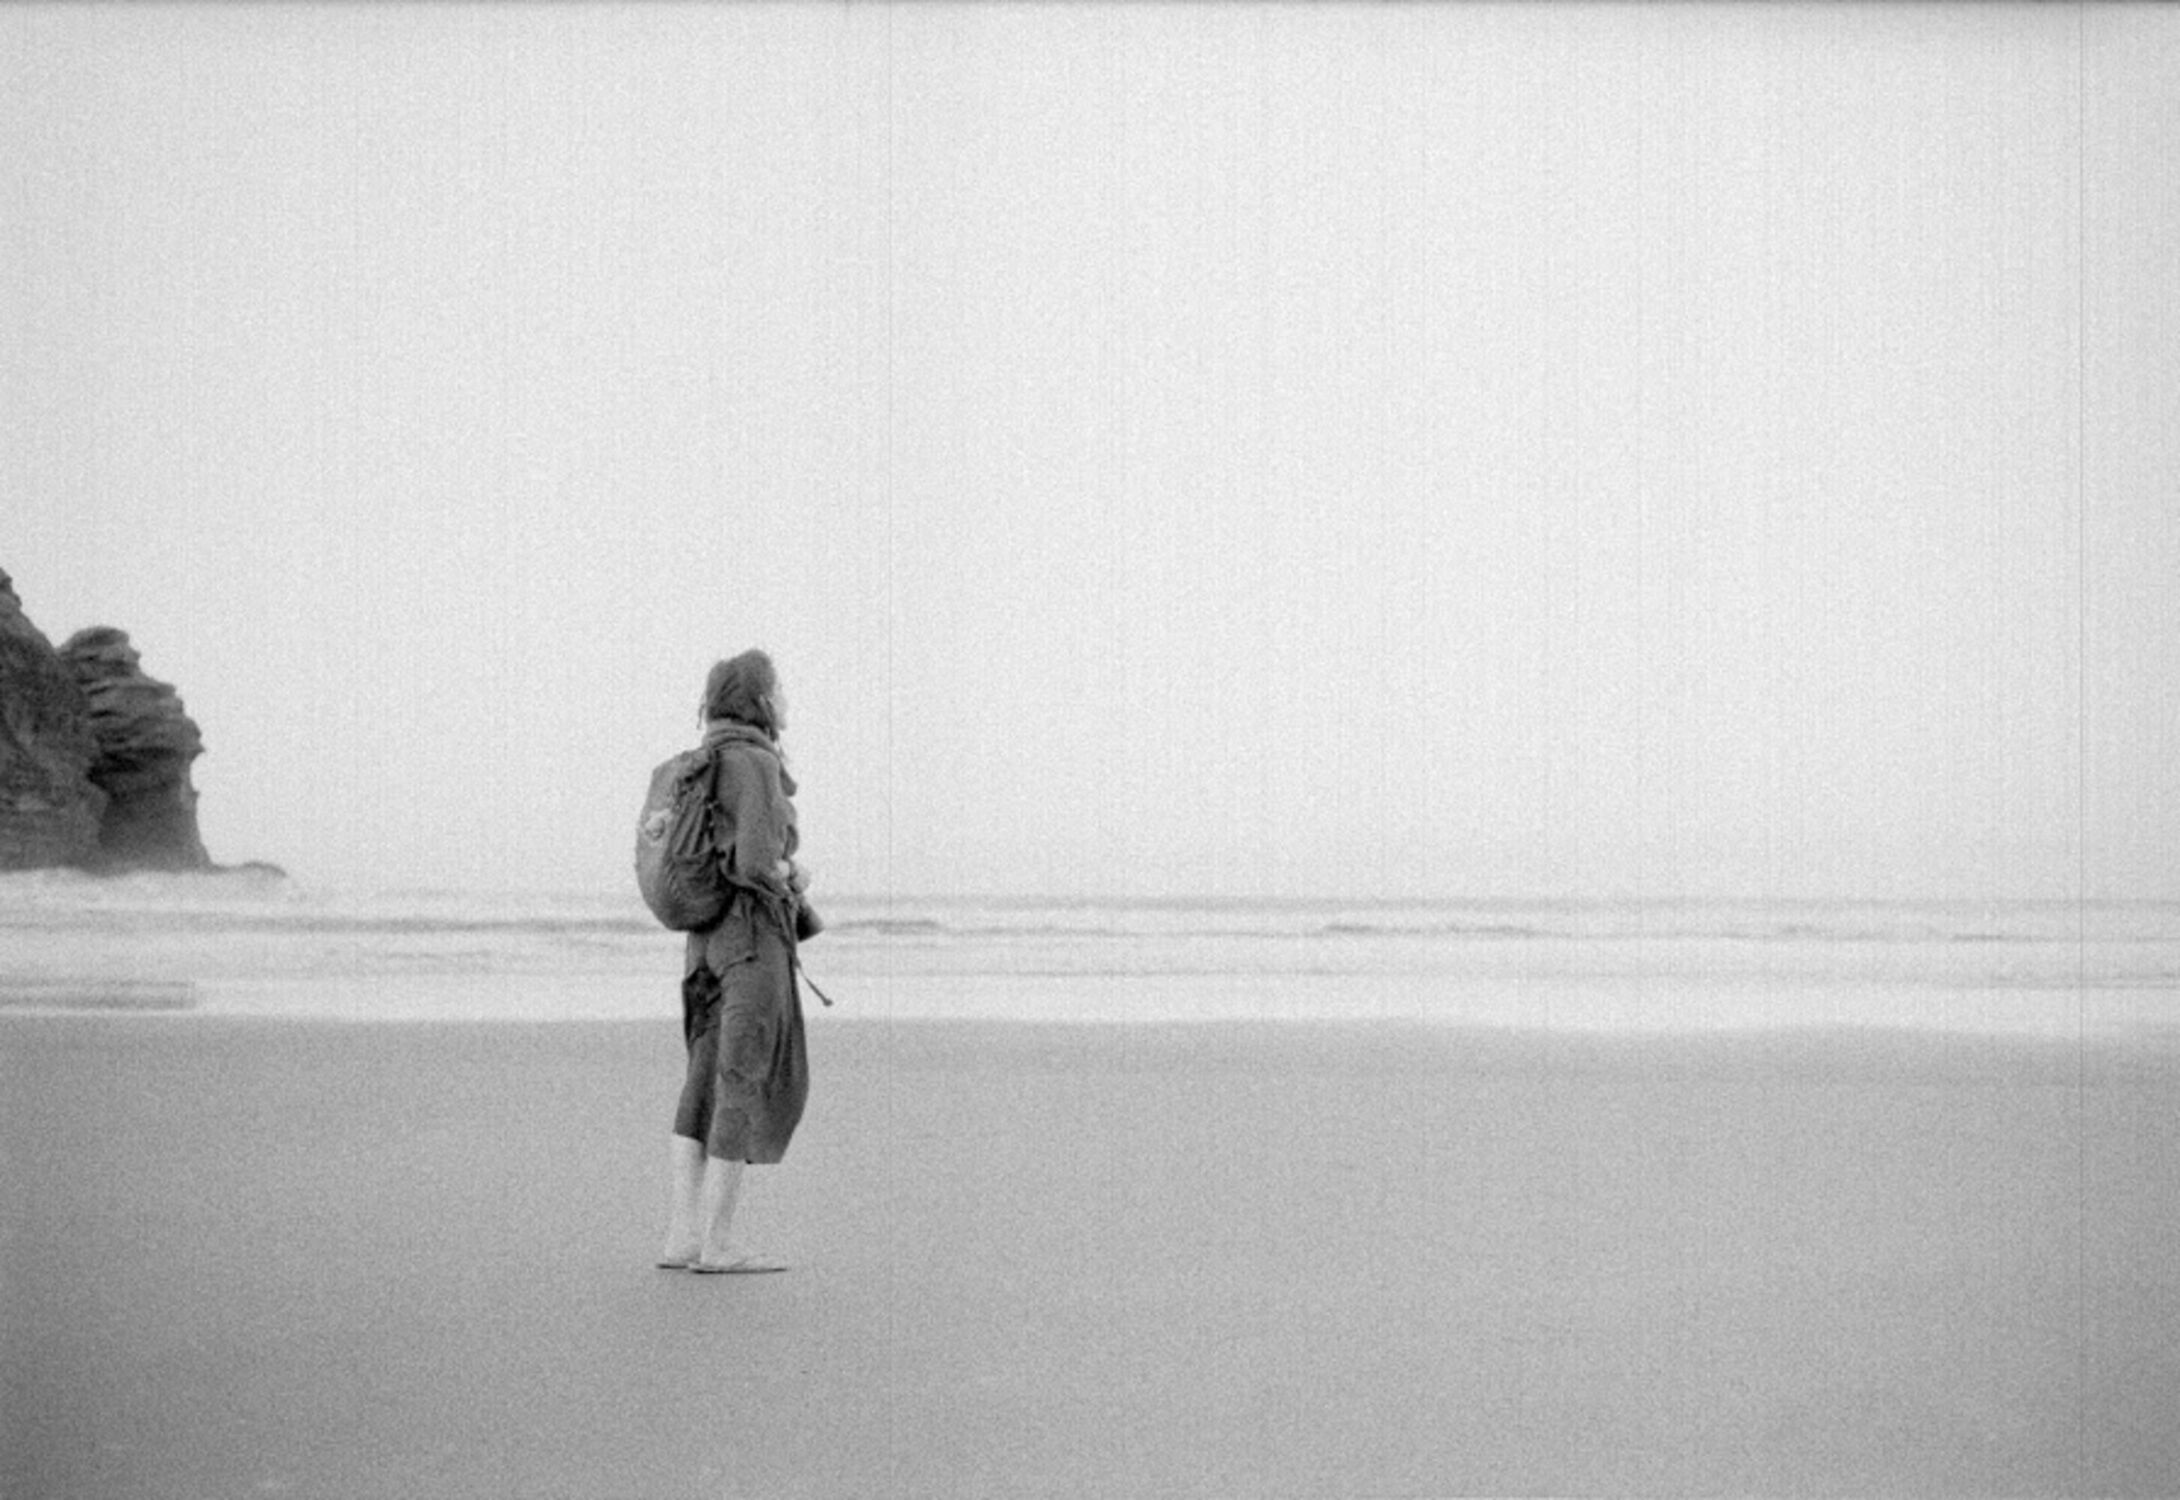 A scan of a girl on a beach, kind of grainy with strong vertical scan lines in the image